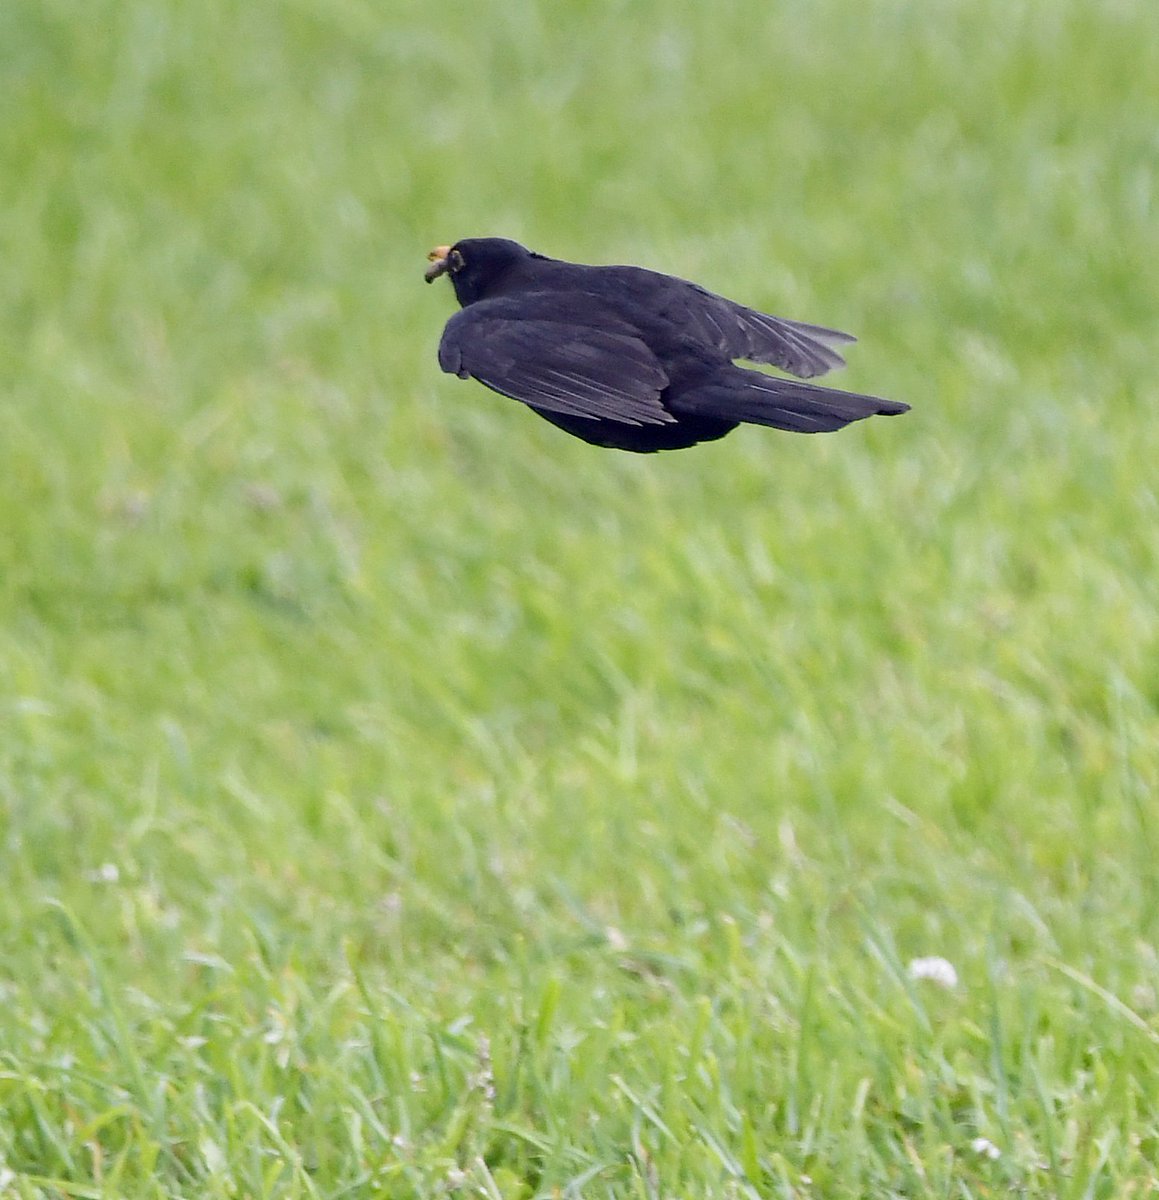 This Blackbird was thrown low and hard..... had to jump over it!!!